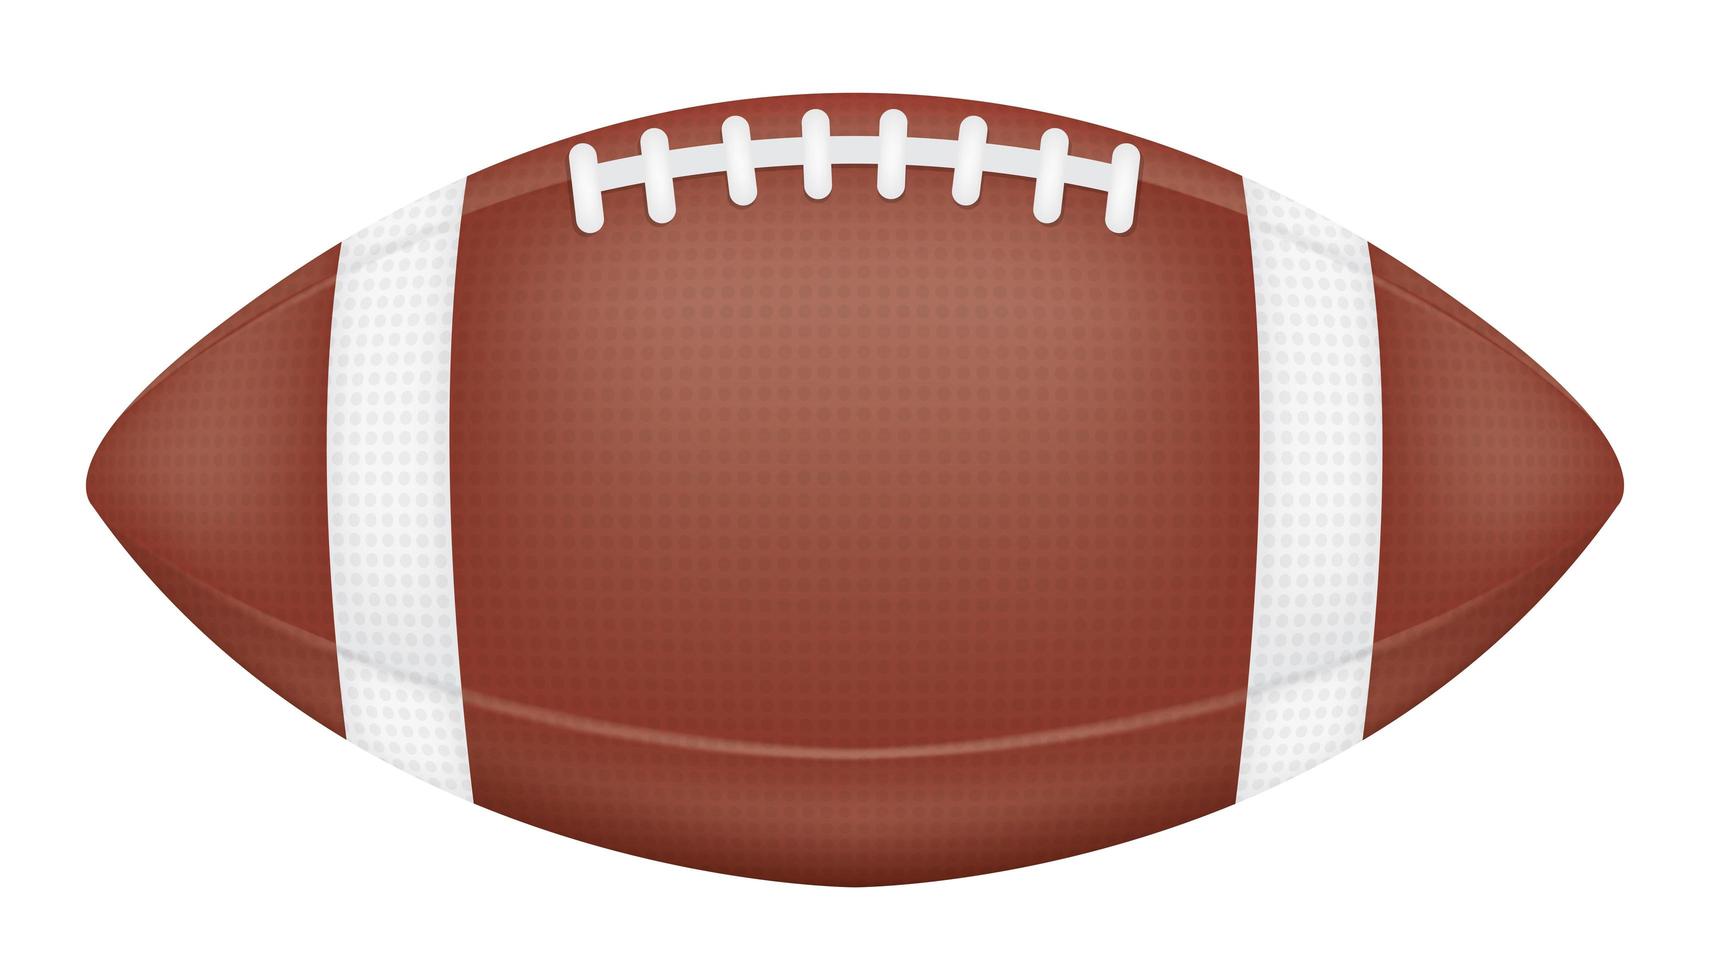 american football on white background vector